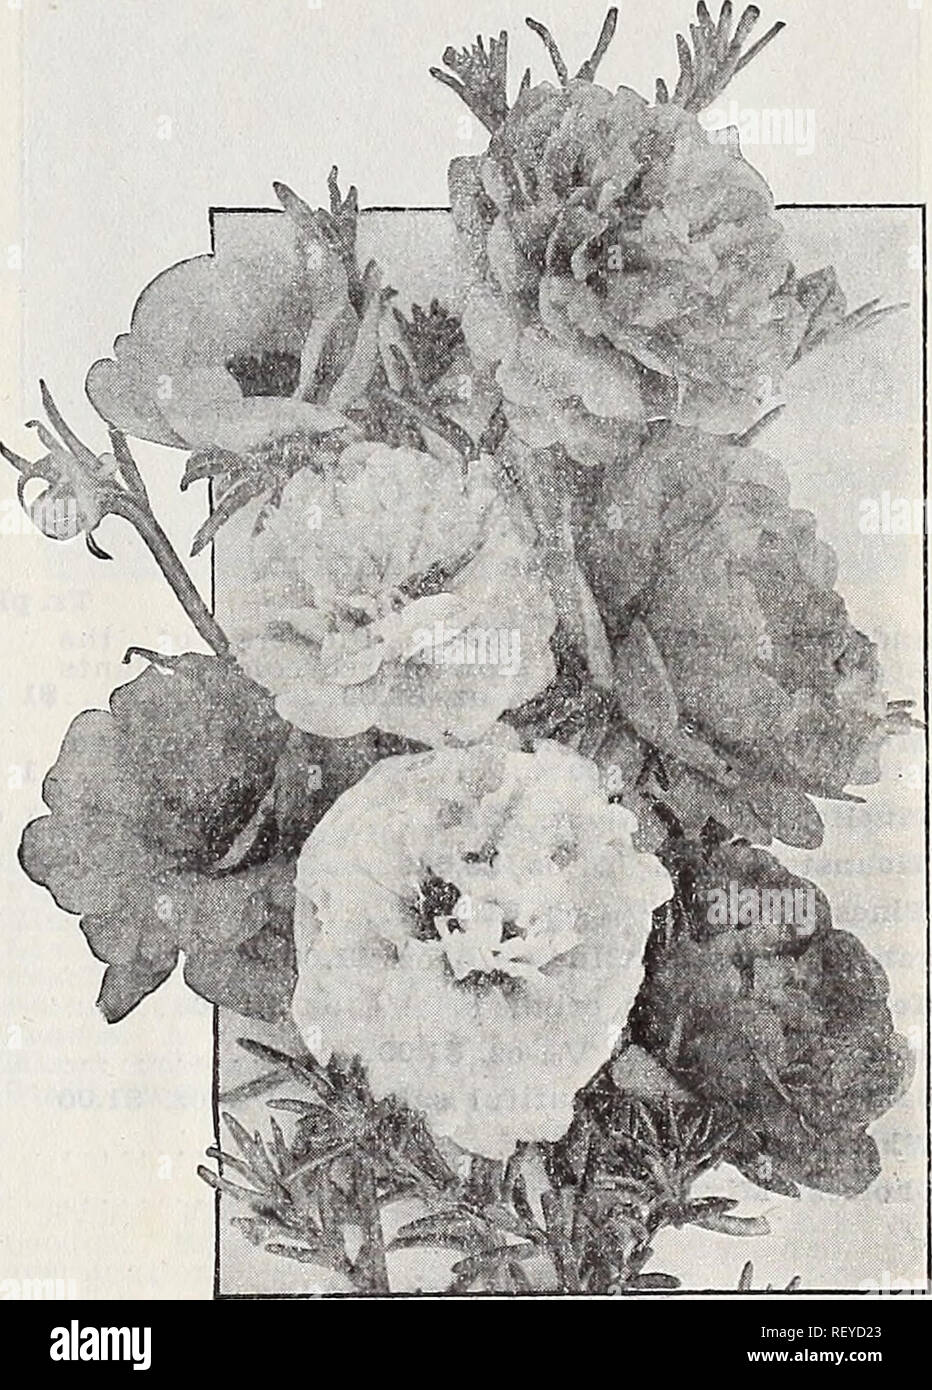 . Dreer's wholesale catalog for florists : winter spring summer 1937. Bulbs (Plants) Catalogs; Vegetables Seeds Catalogs; Flowers Seeds Catalogs; Nurseries (Horticulture) Catalogs; Gardening Equipment and supplies Catalogs. Phlox Drummondi grandlflora Phlox Drummondi grandiflora These are fine summer-flowering annuals and make excellent pot plants for spring sales. The grandlflora varieties are noted for their lovely large blooms which are arranged in truly giant trusses and there is a con- tinuous display of color from early summer until late fall. The colors we list have all been chosen for  Stock Photo